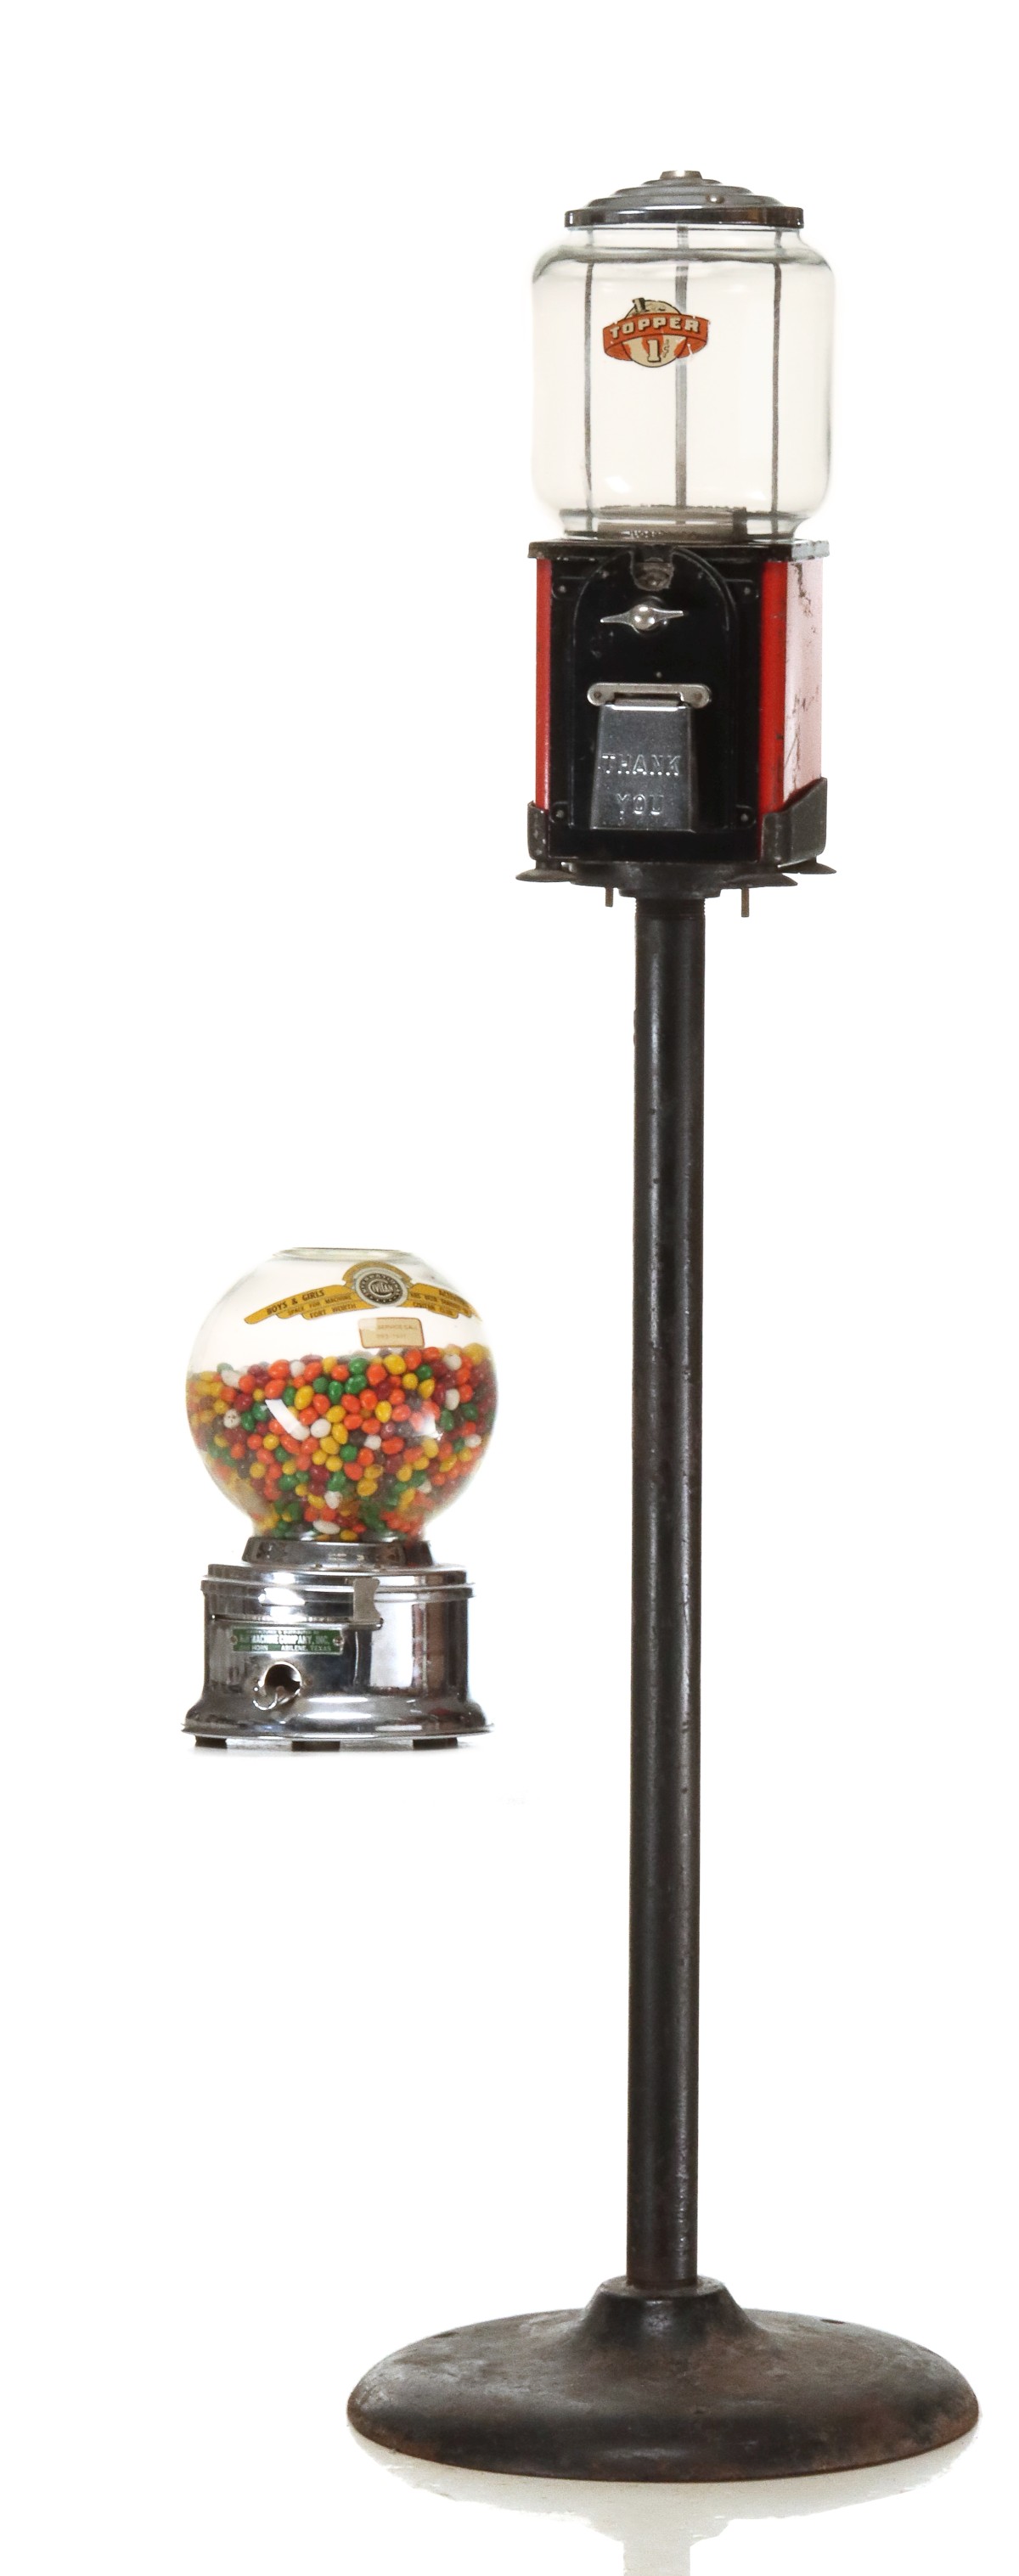 VICTOR TOPPER AND H&W COIN OPERATED GUMBALL MACHINES